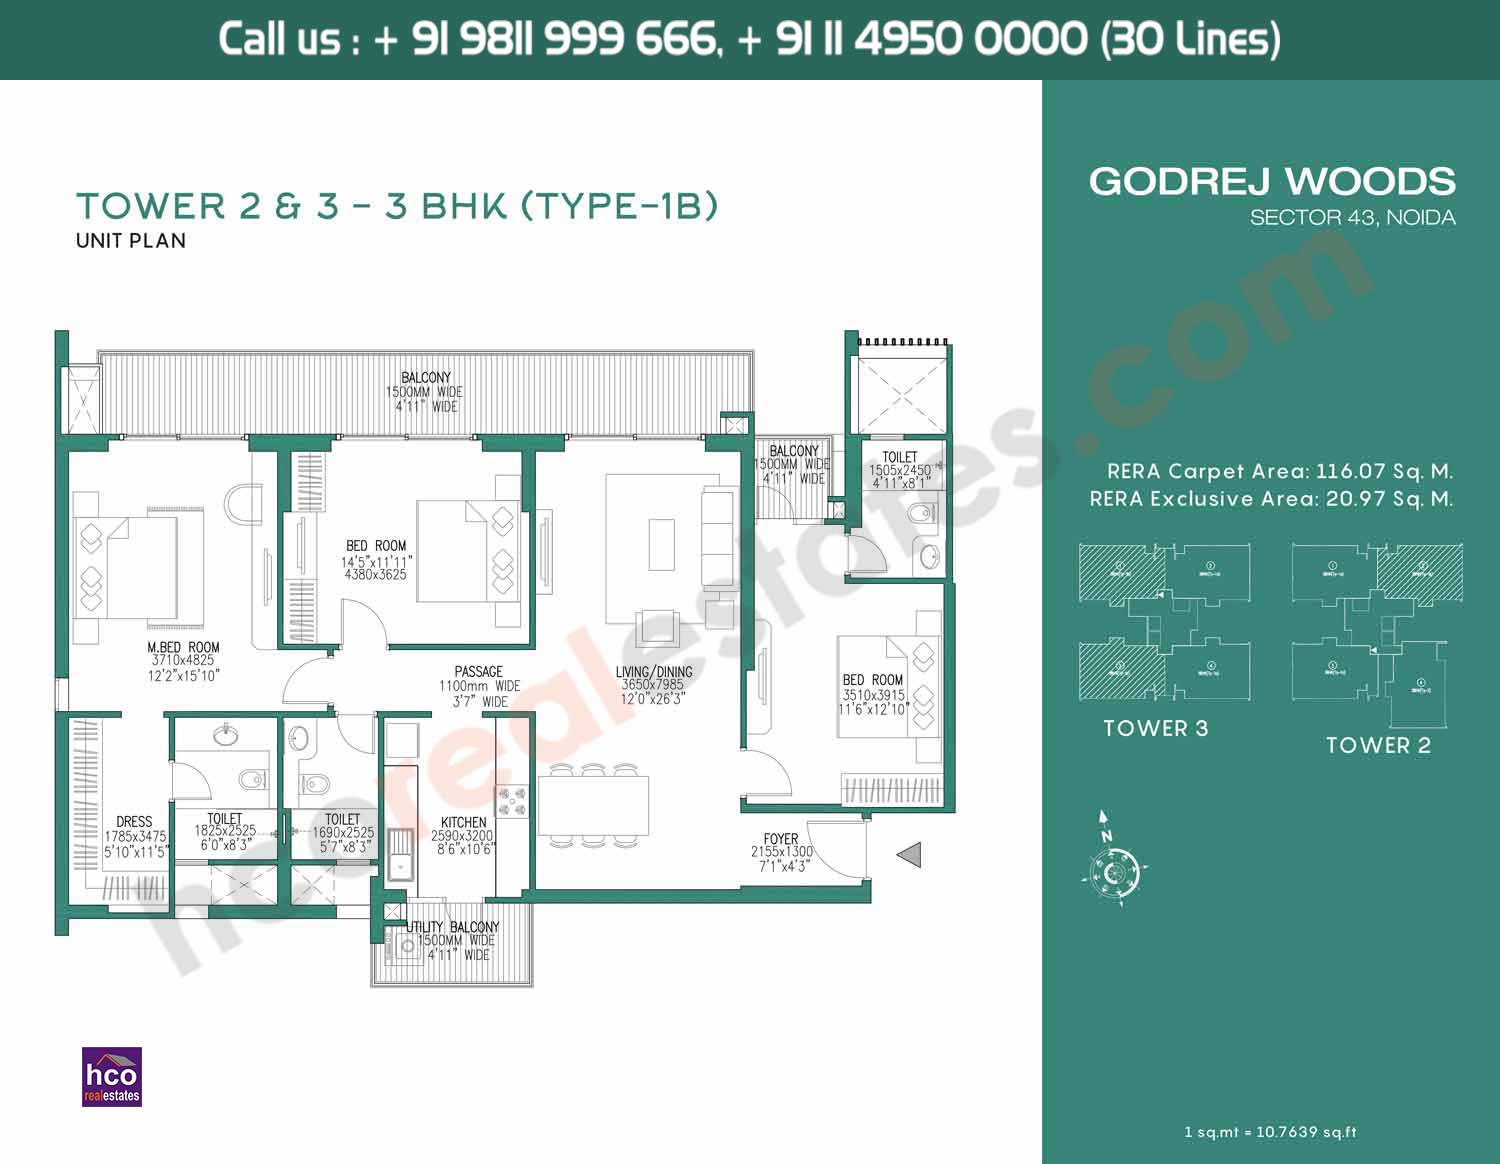 3 BHK, Type – 1B Tower – 2 & Tower - 3: 1160 Sq. Ft.